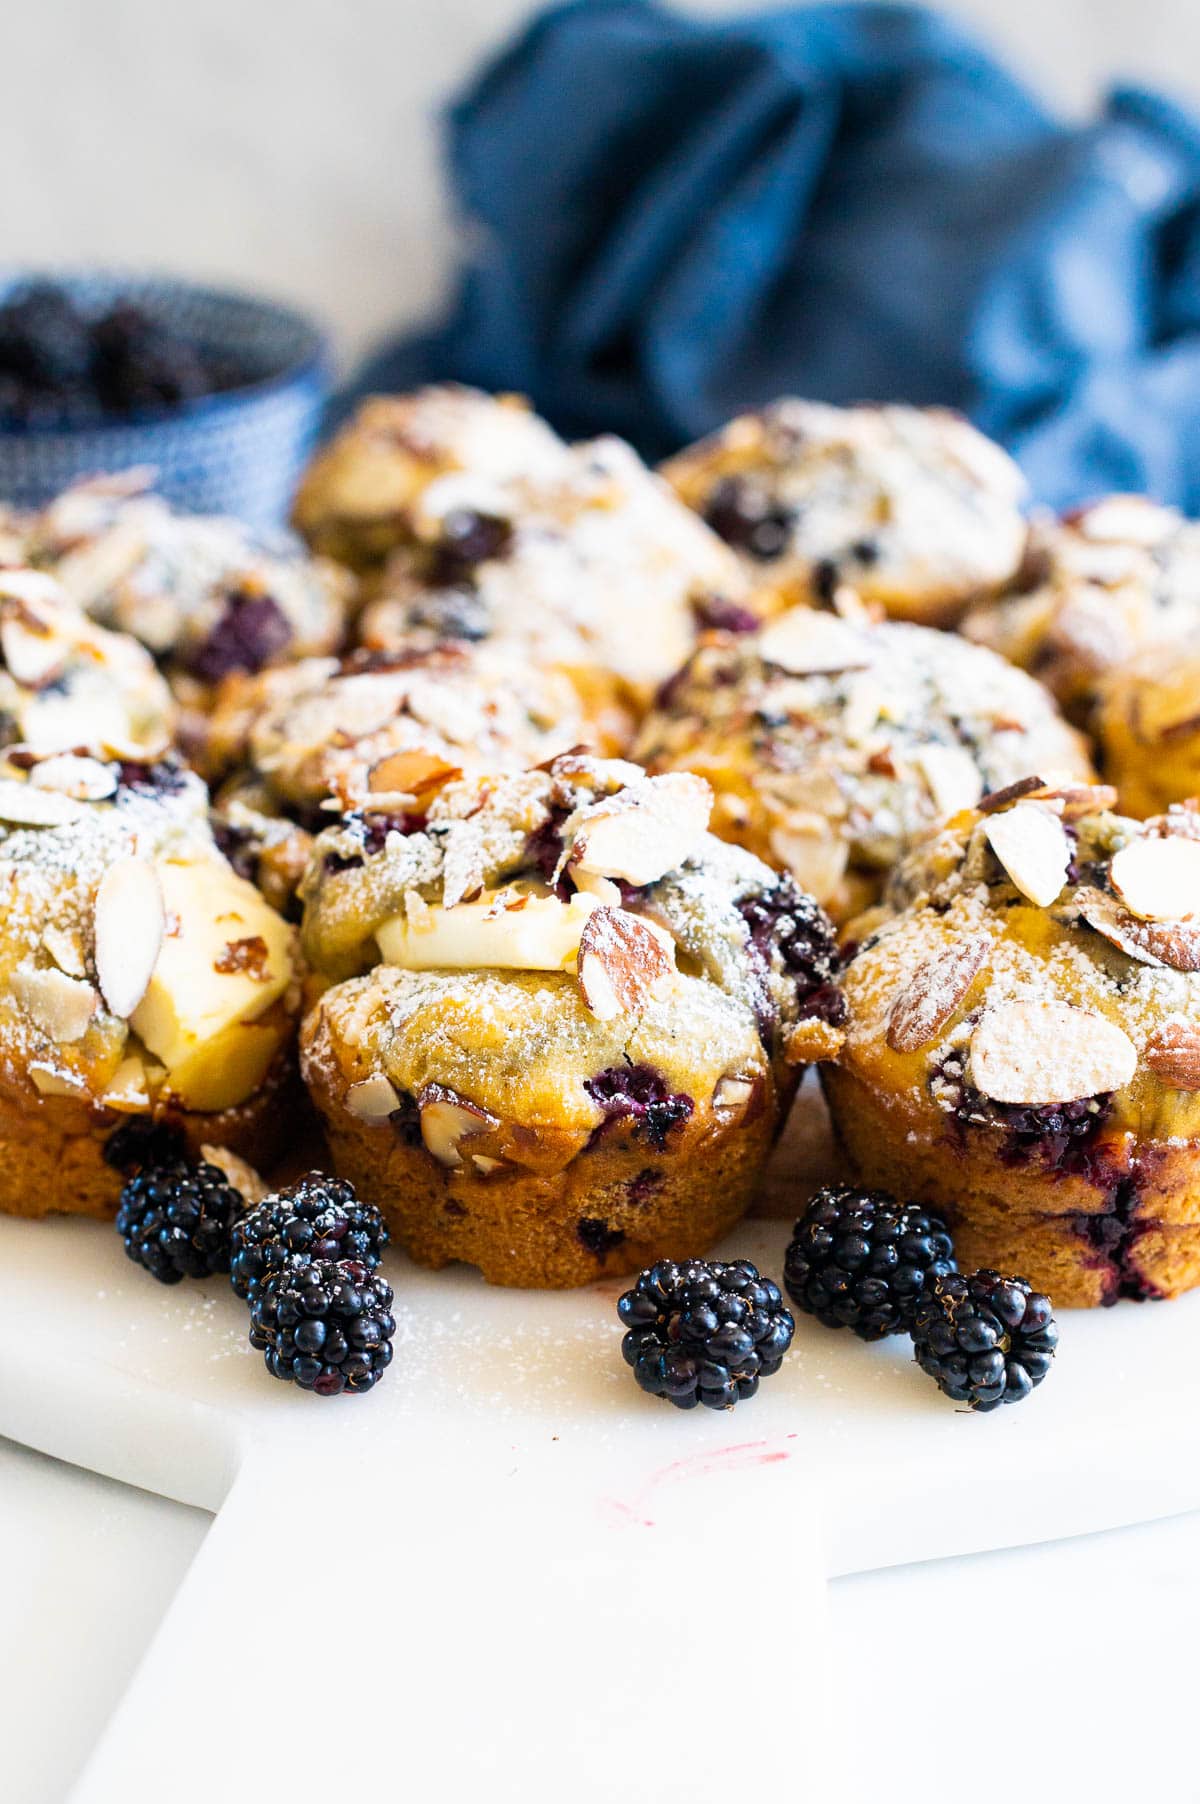 Blackberry muffins with cream cheese, sliced almonds and icing sugar served on a platter with fresh blackberries around them.